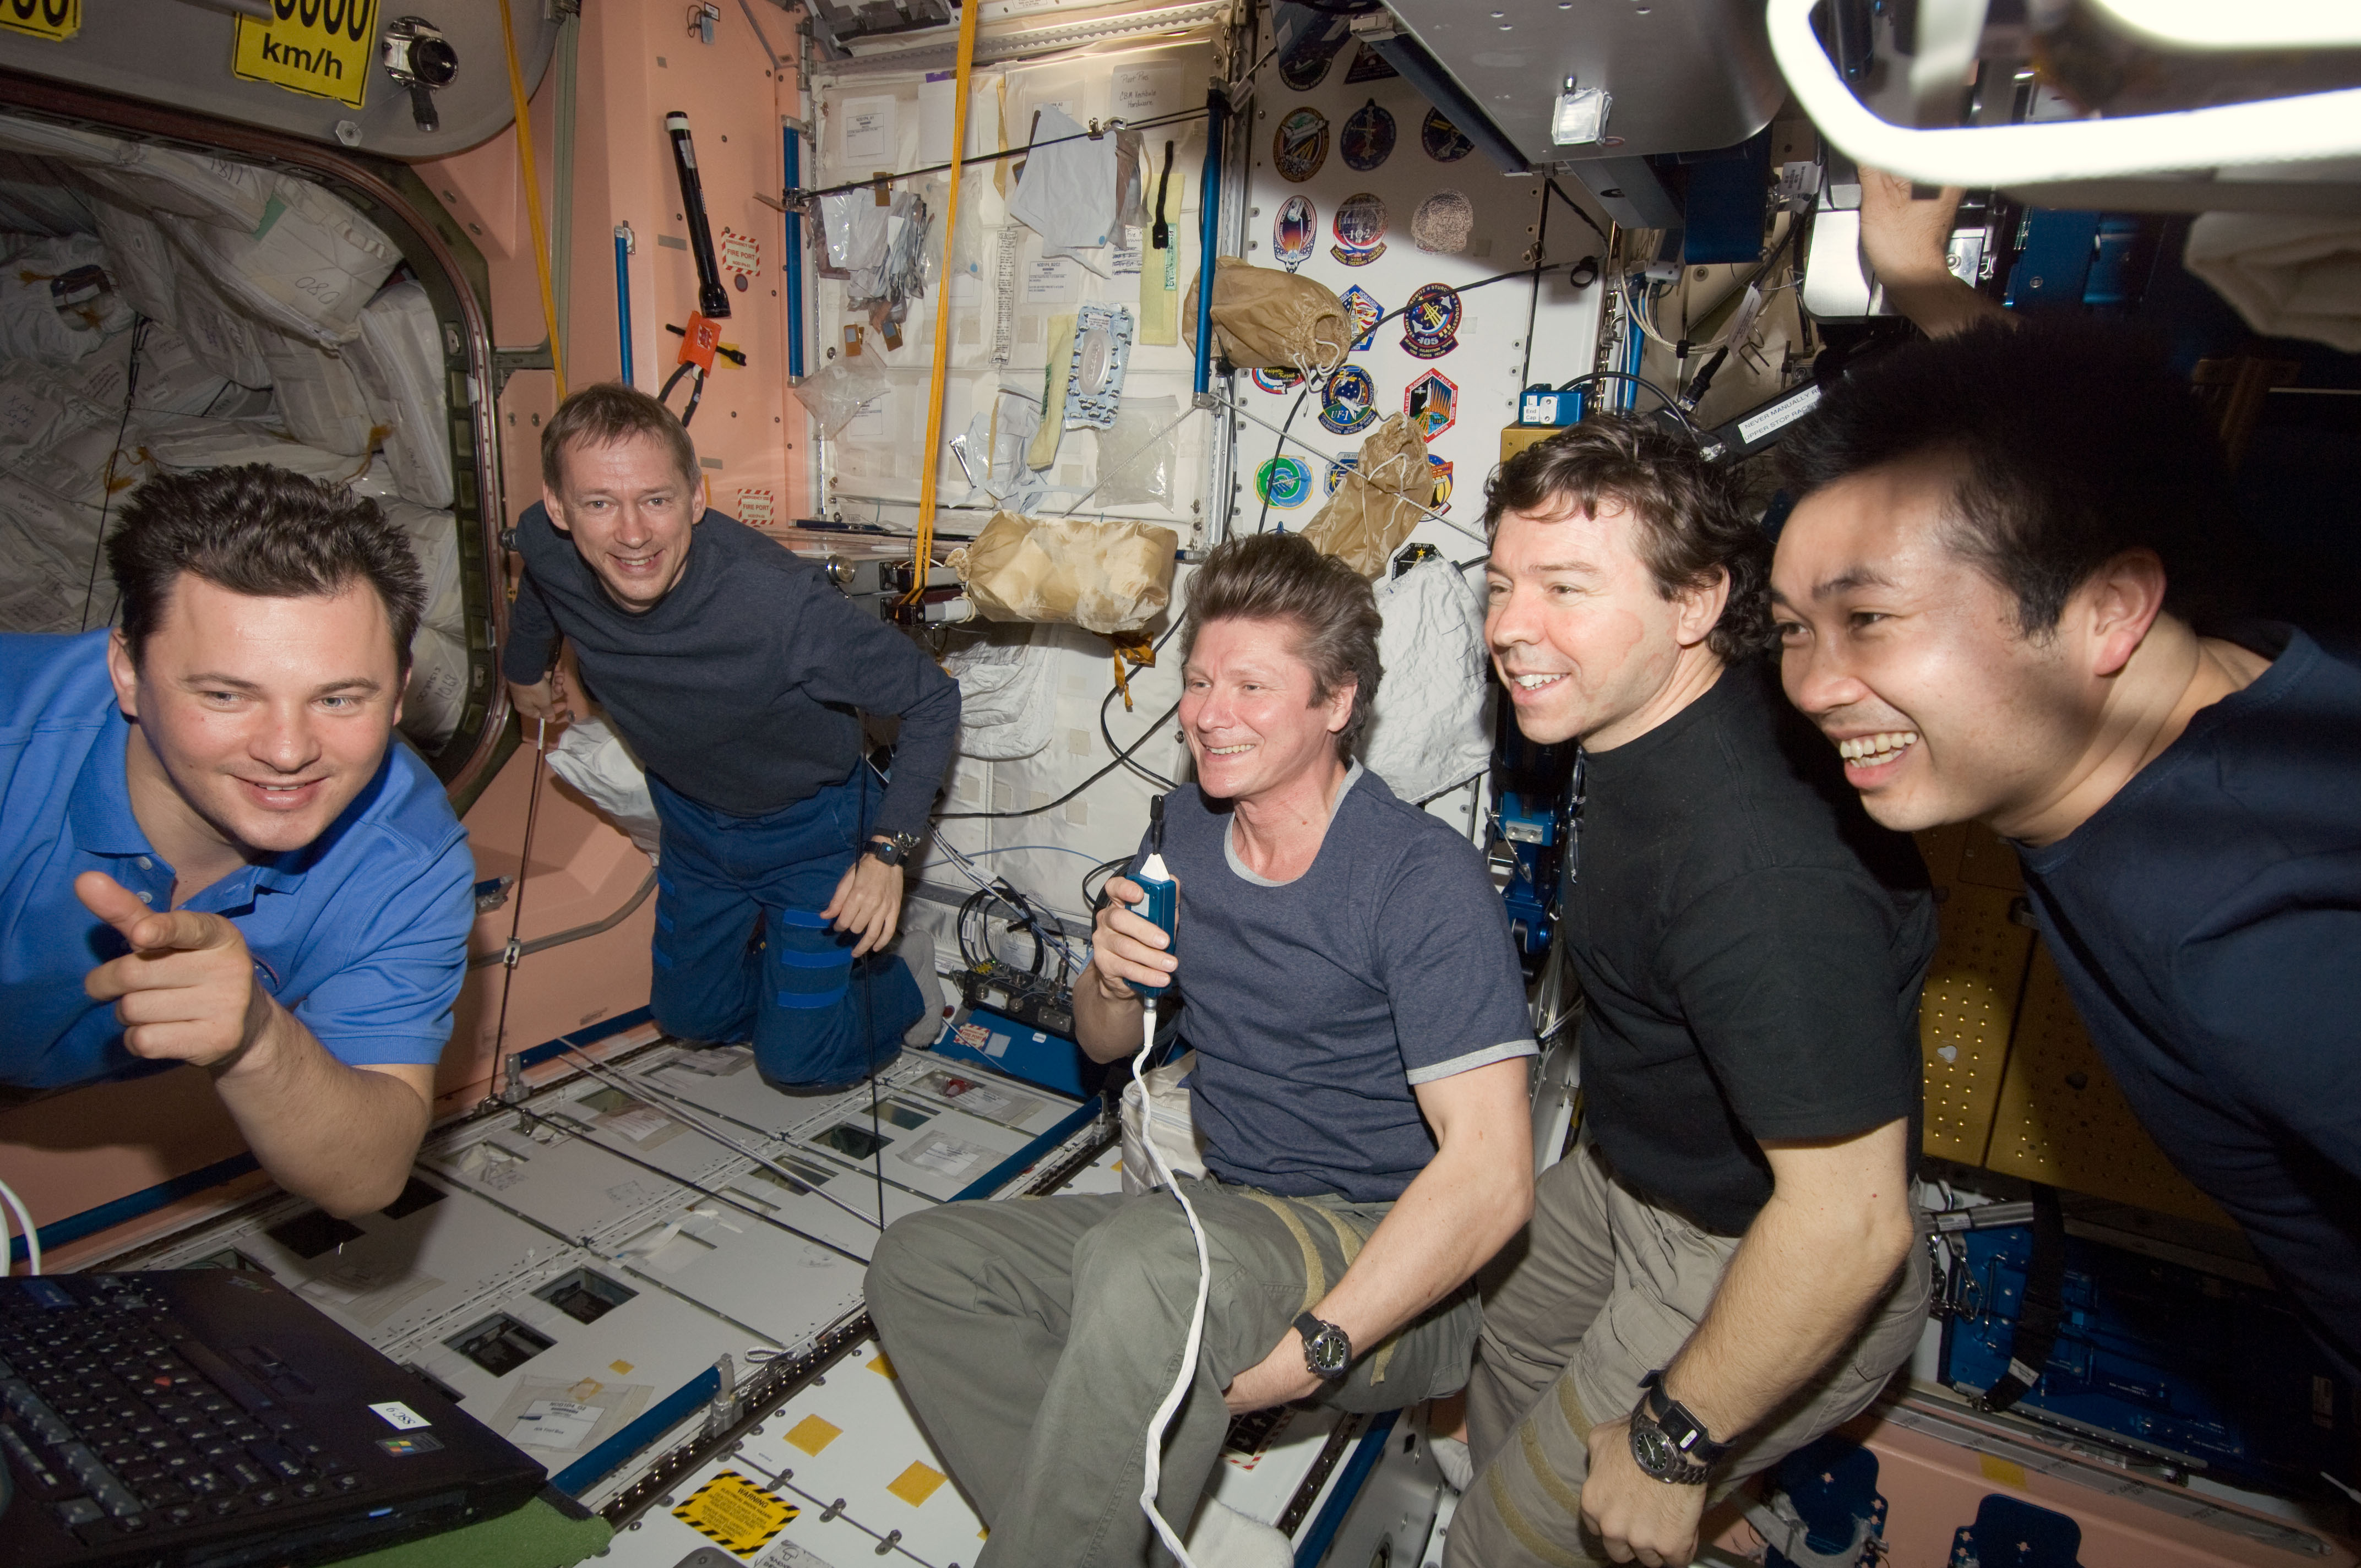 ISS-20 crew members view a monitor in the Unity node